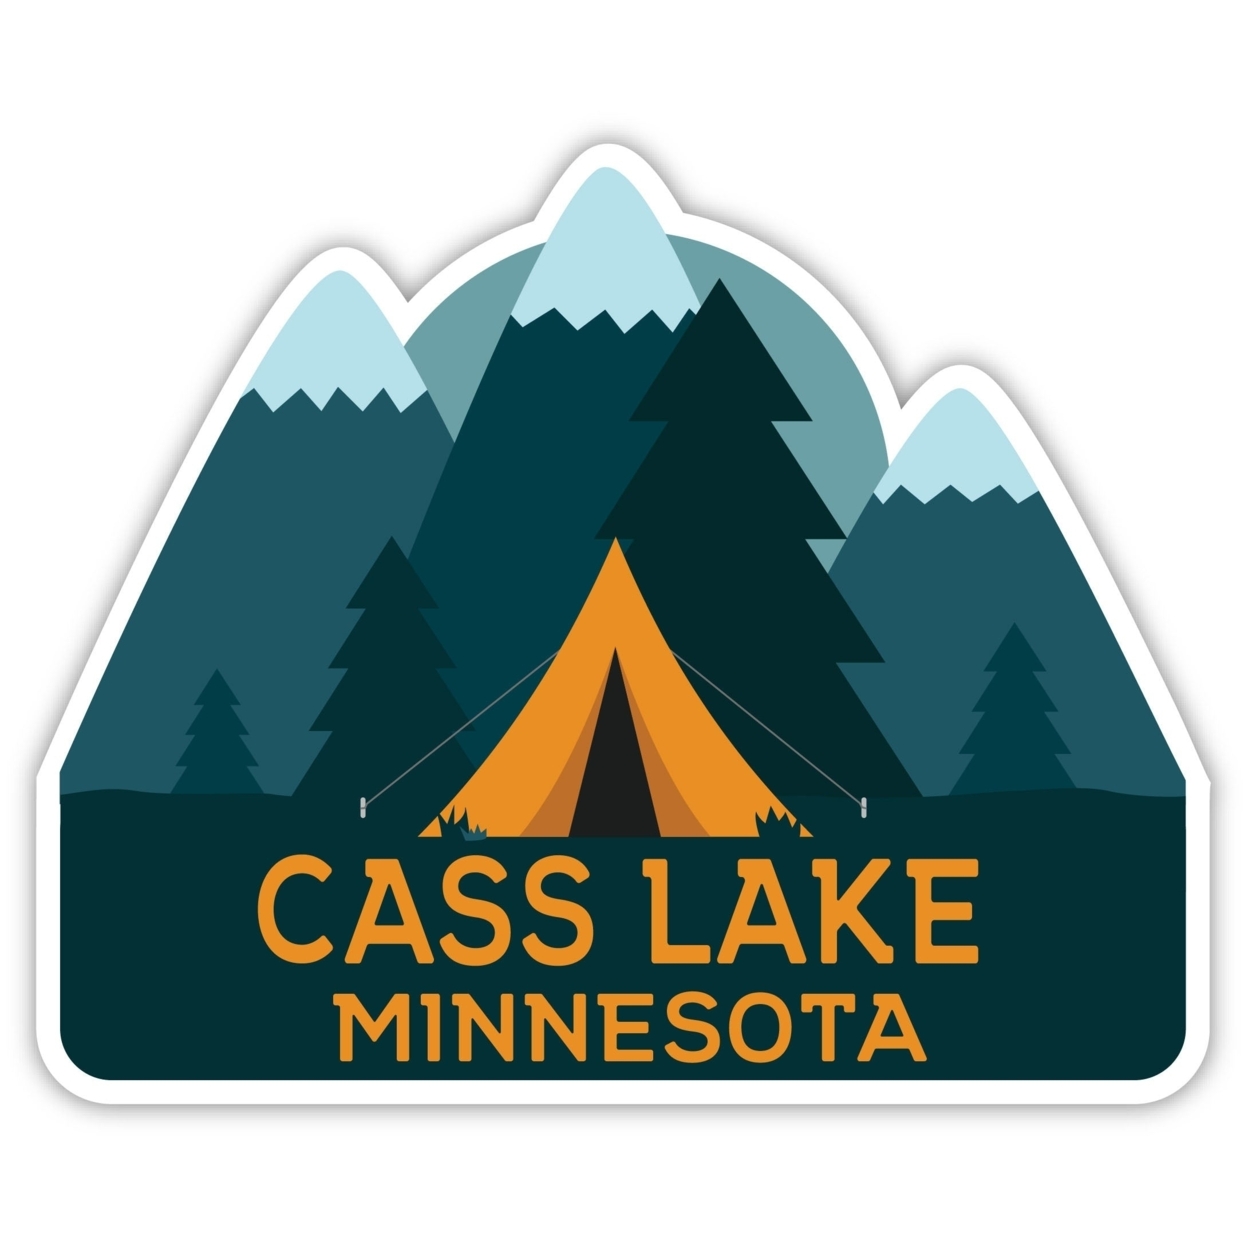 Cass Lake Minnesota Souvenir Decorative Stickers (Choose Theme And Size) - 4-Pack, 10-Inch, Tent